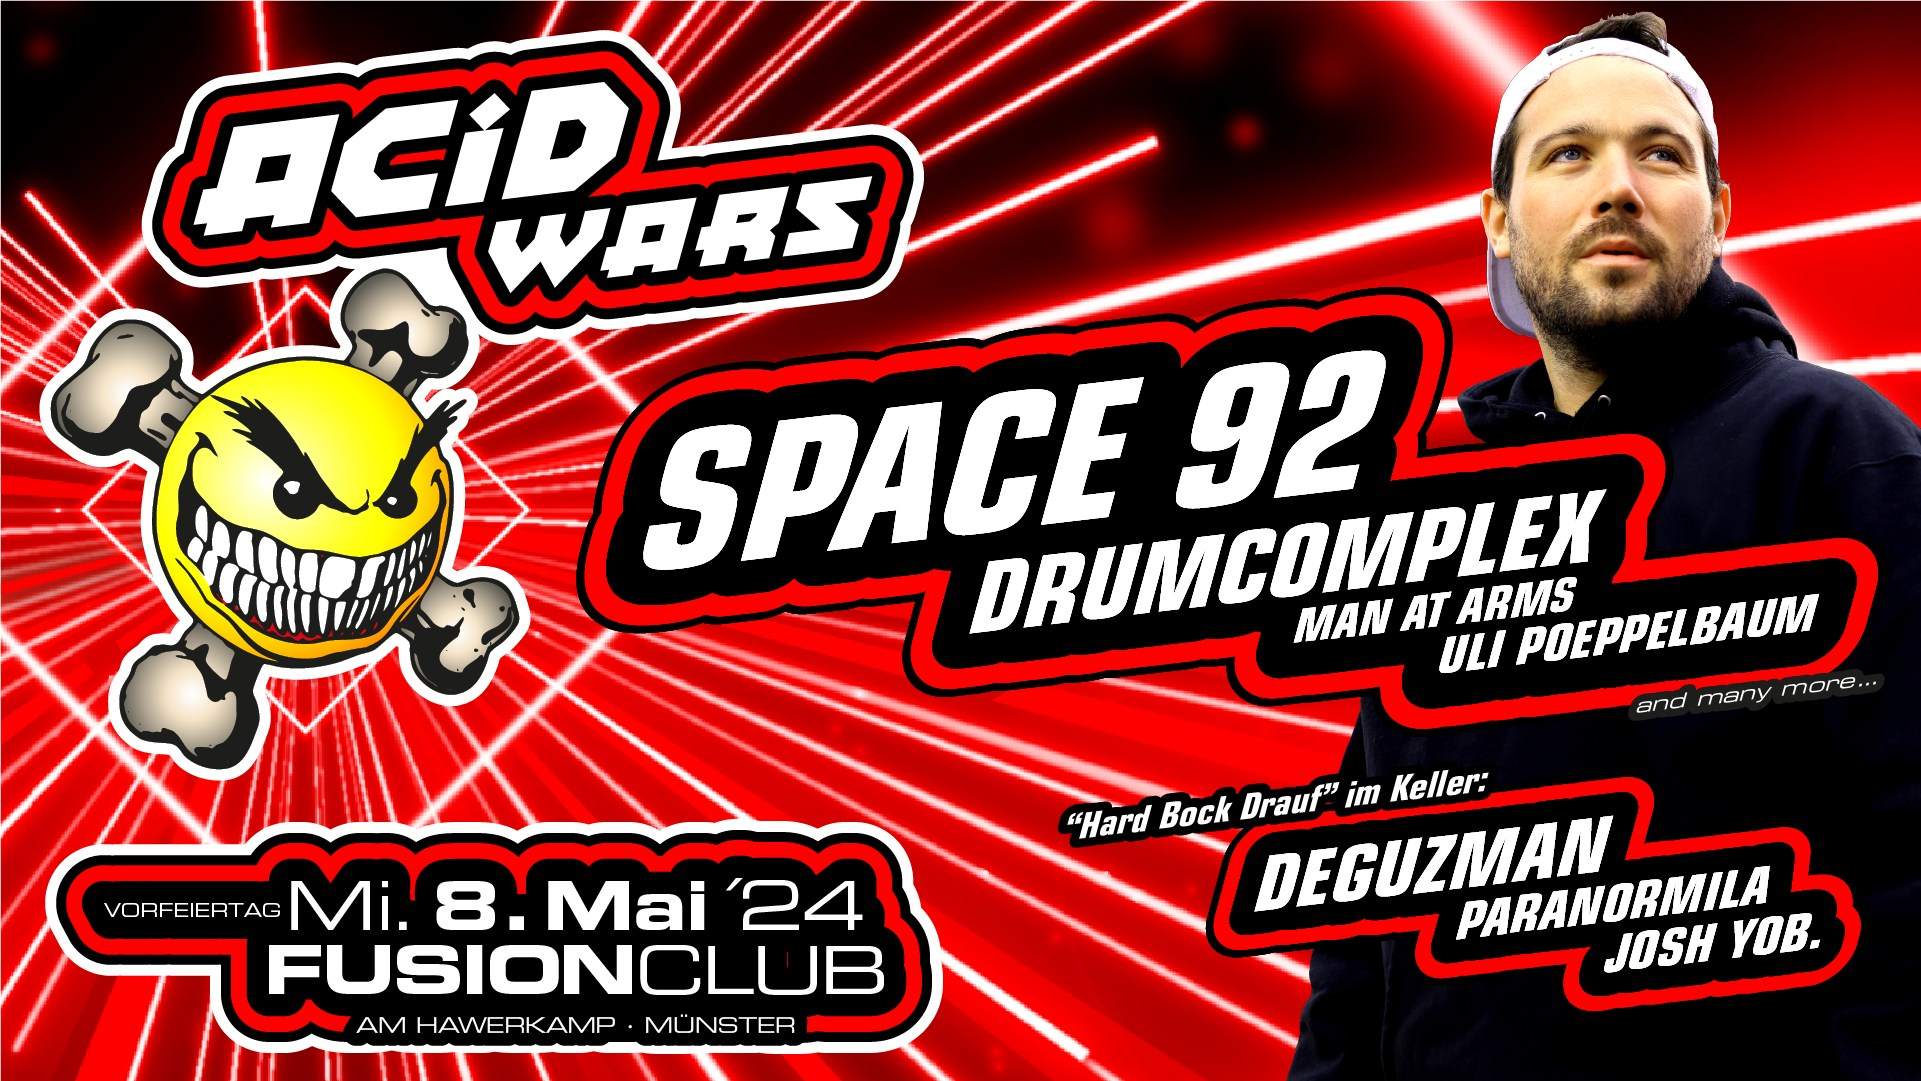 Acid Wars with Space92 - フライヤー表